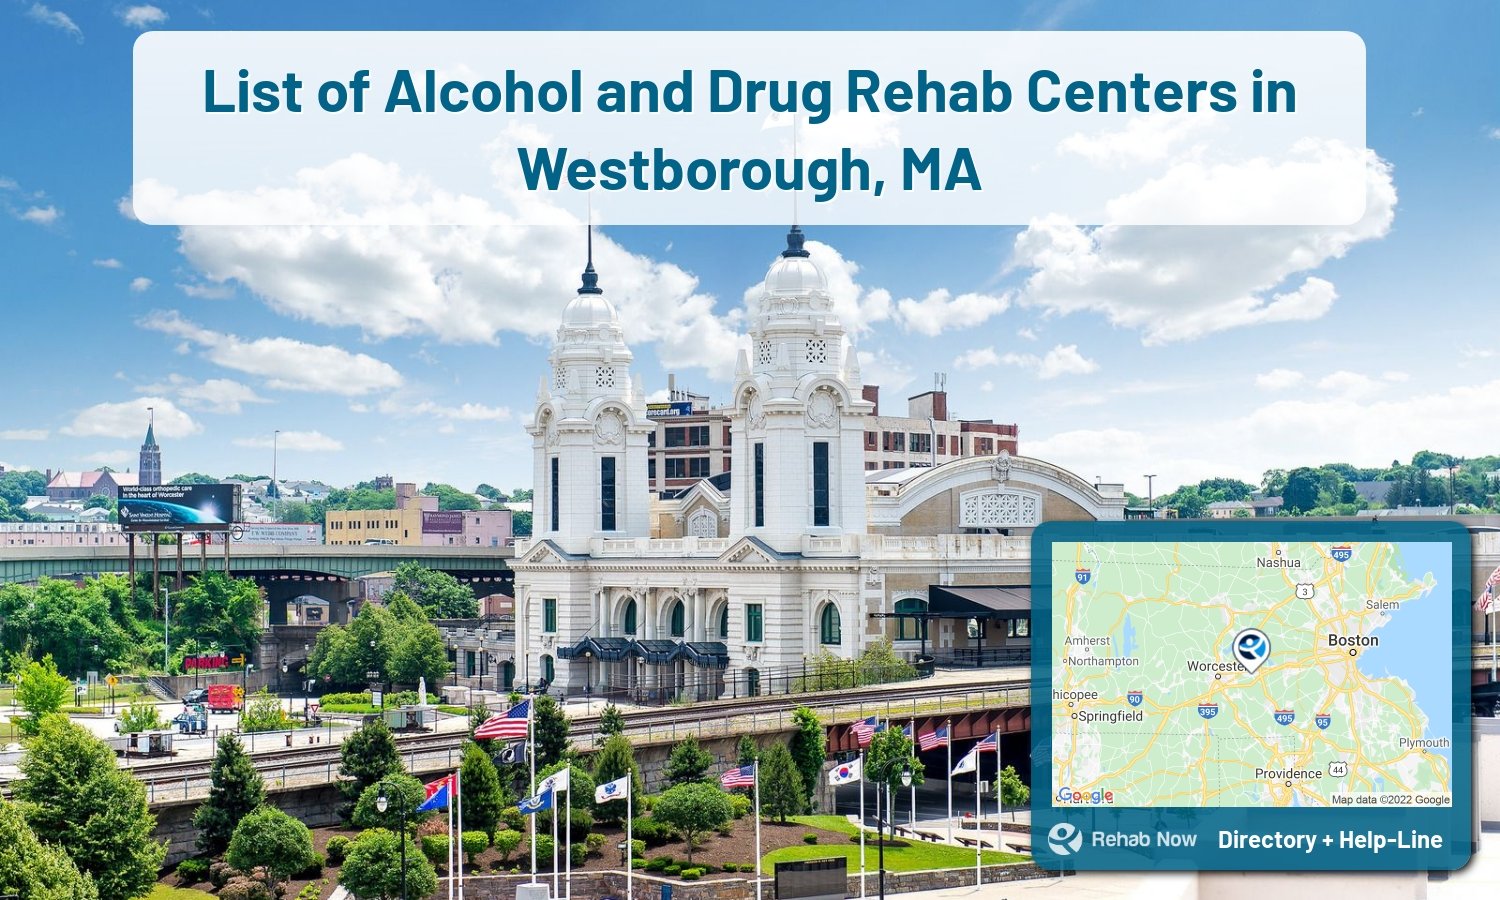 View options, availability, treatment methods, and more, for drug rehab and alcohol treatment in Westborough, Massachusetts